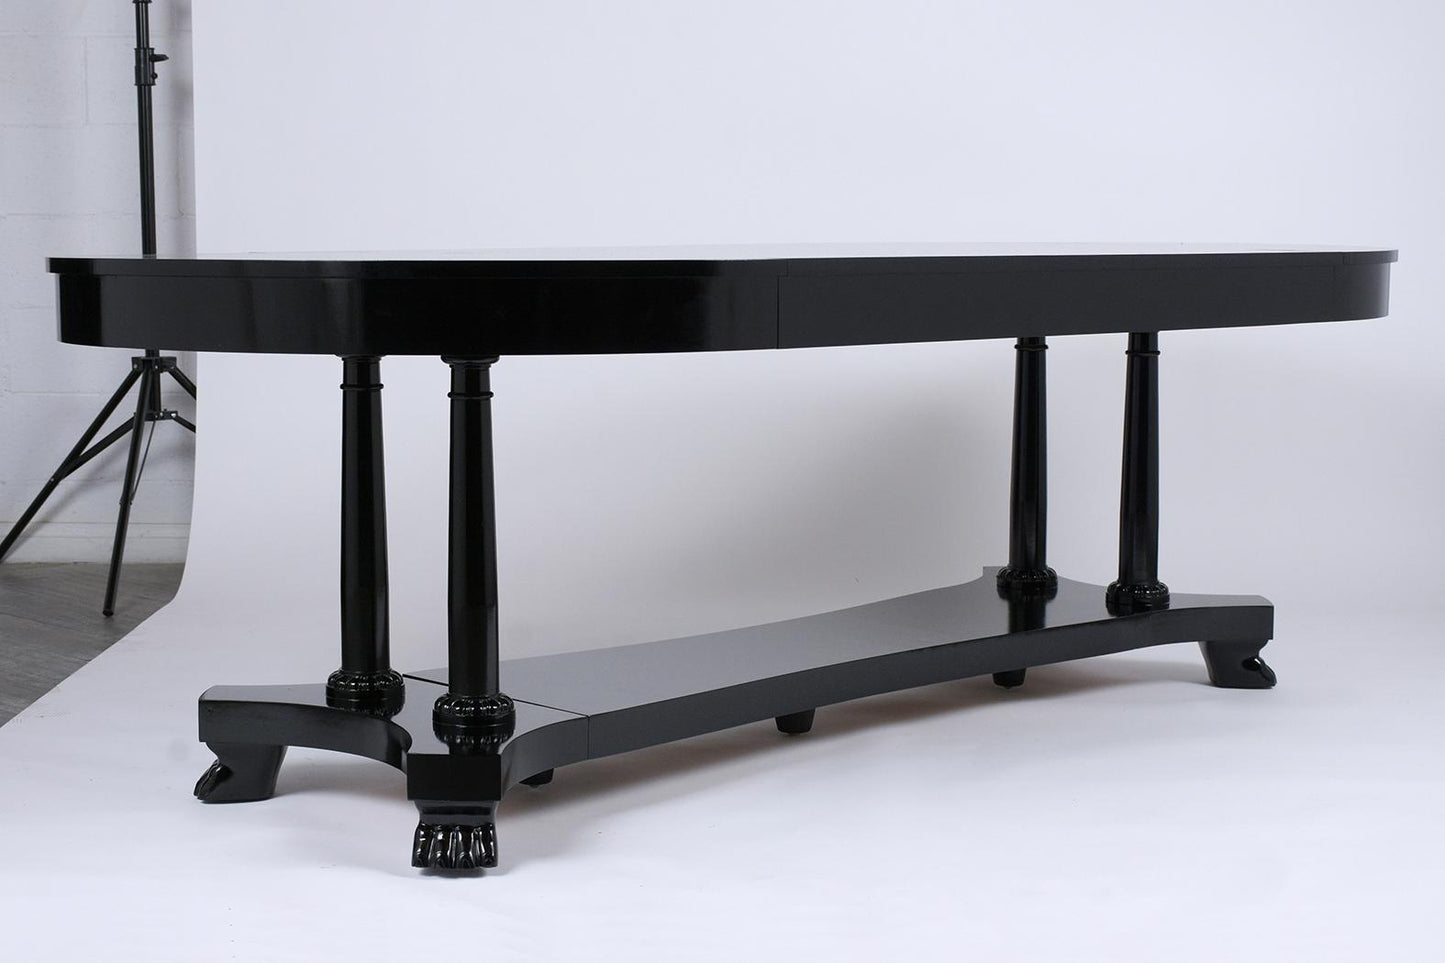 French Extending Dining Table